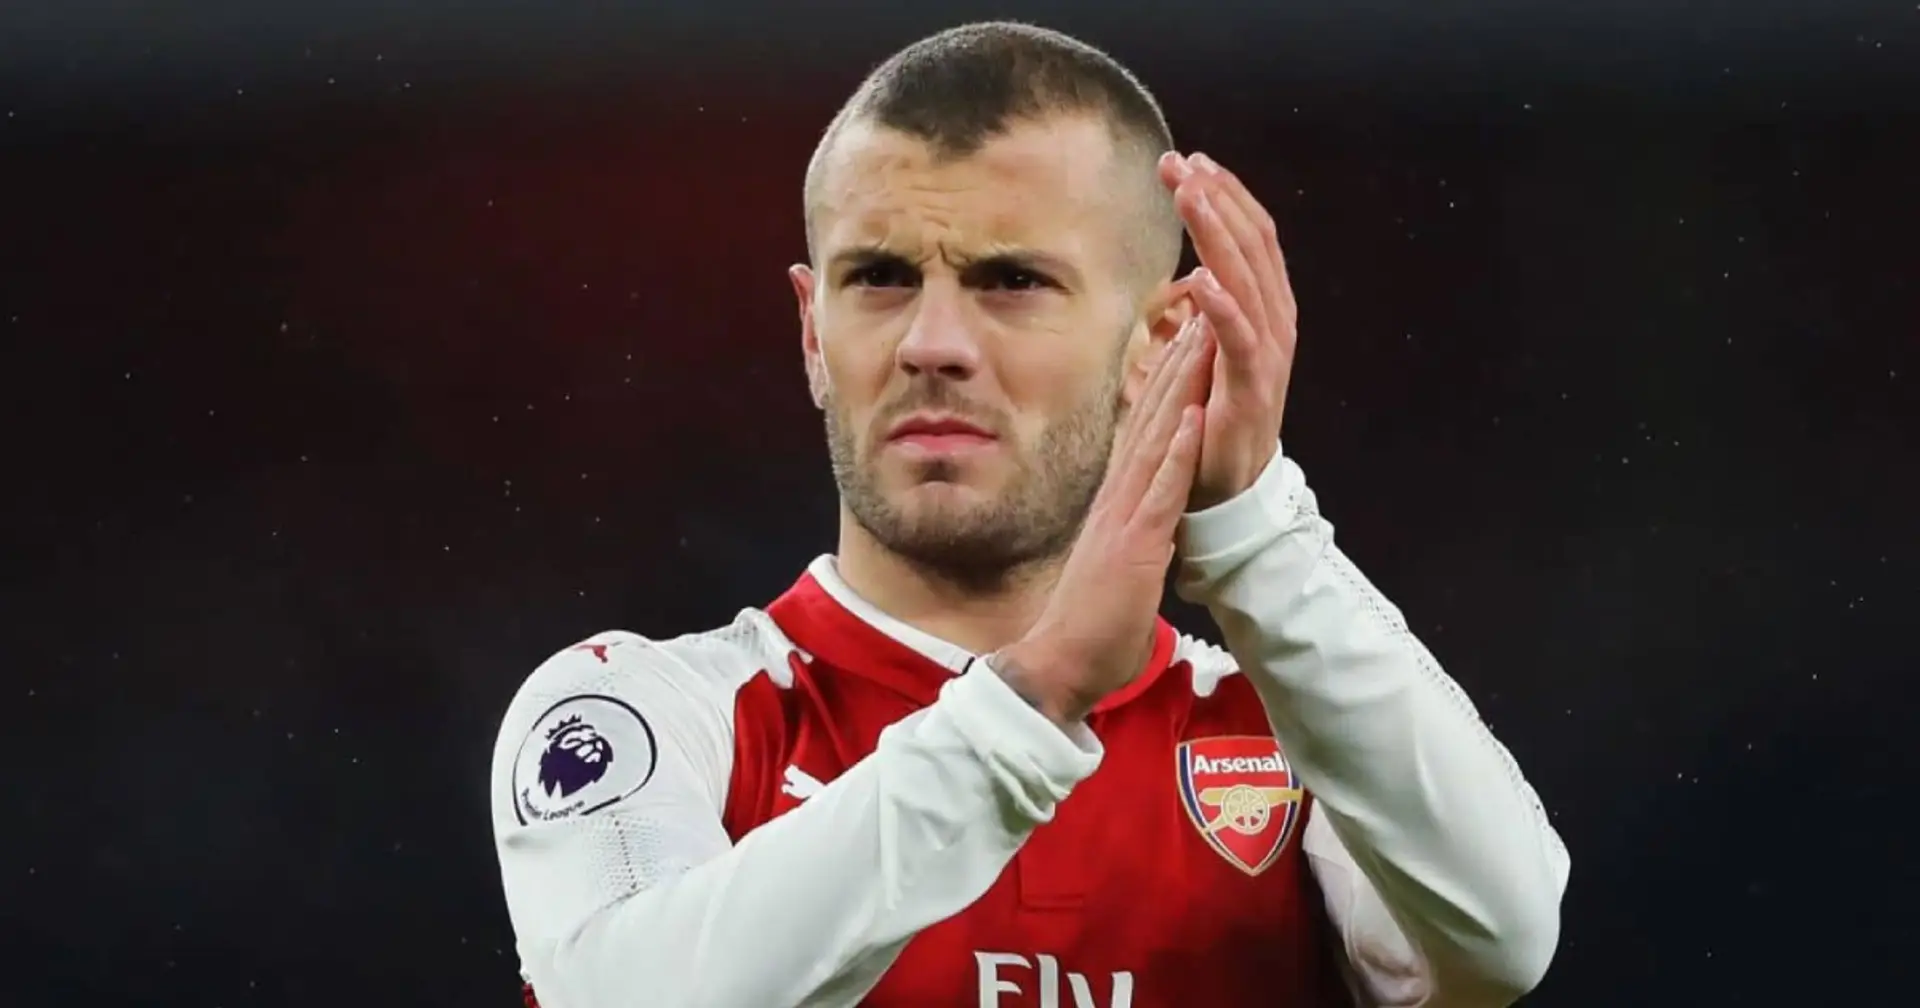 Jack Wilshere retires from football at age of 30, set to become Arsenal U18s head coach